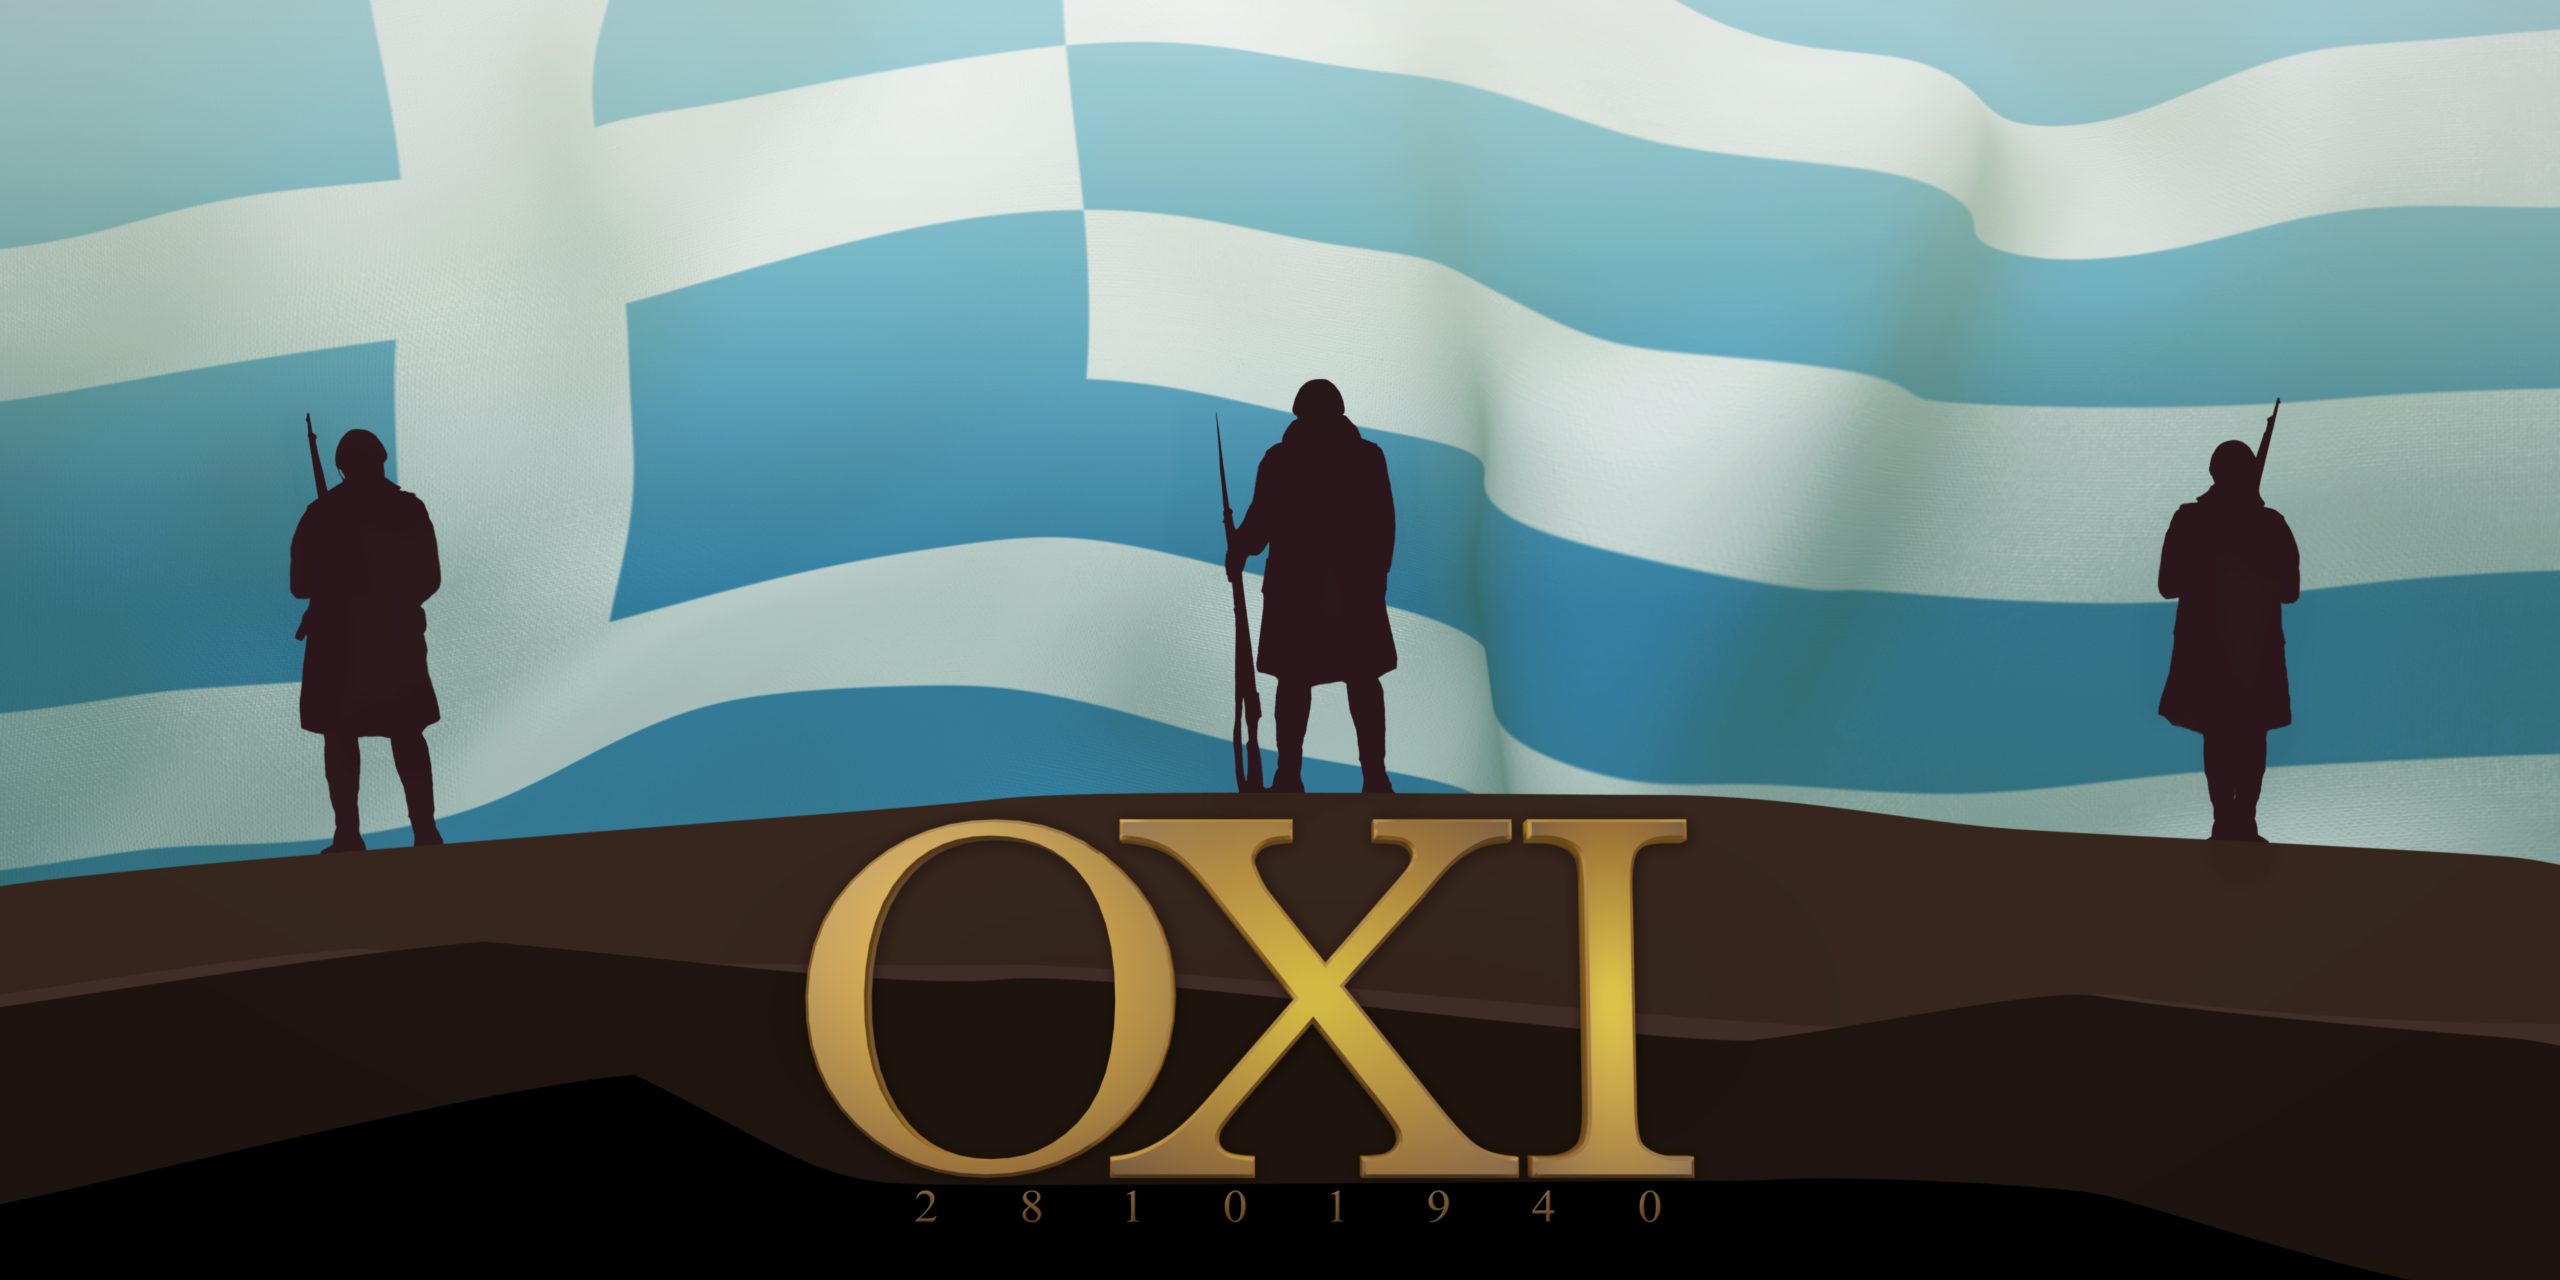 Featured image for “Oxi Day and “Freedom or Death.” Lest we forget”